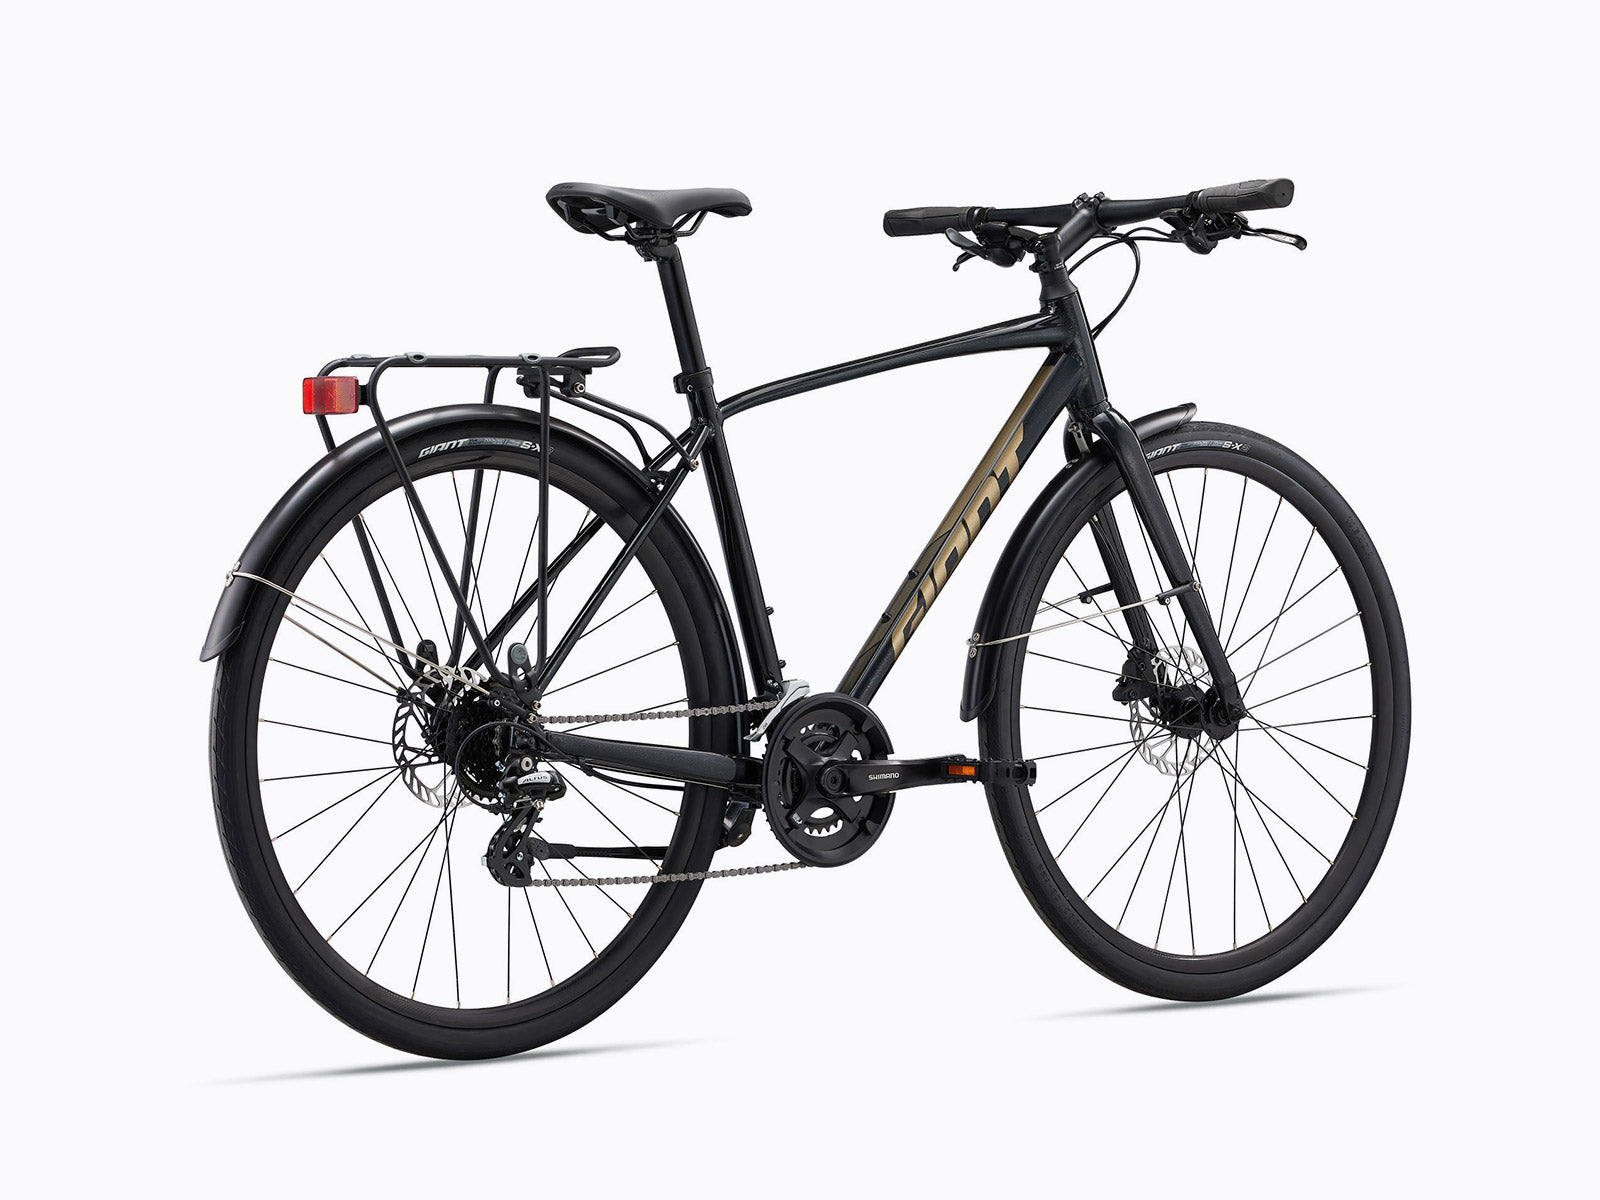 Cross City Disc 2 Equipped